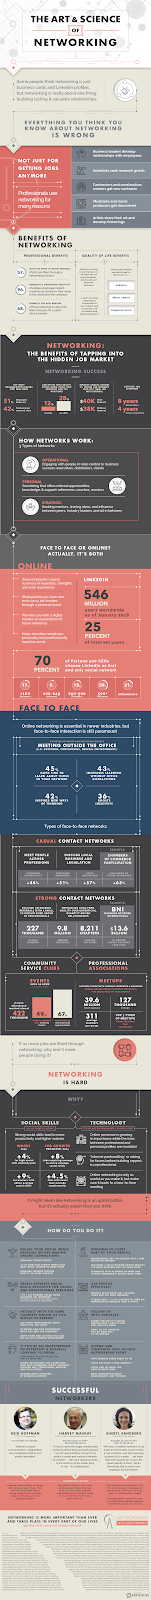 Art and Science of Networking #Infographic